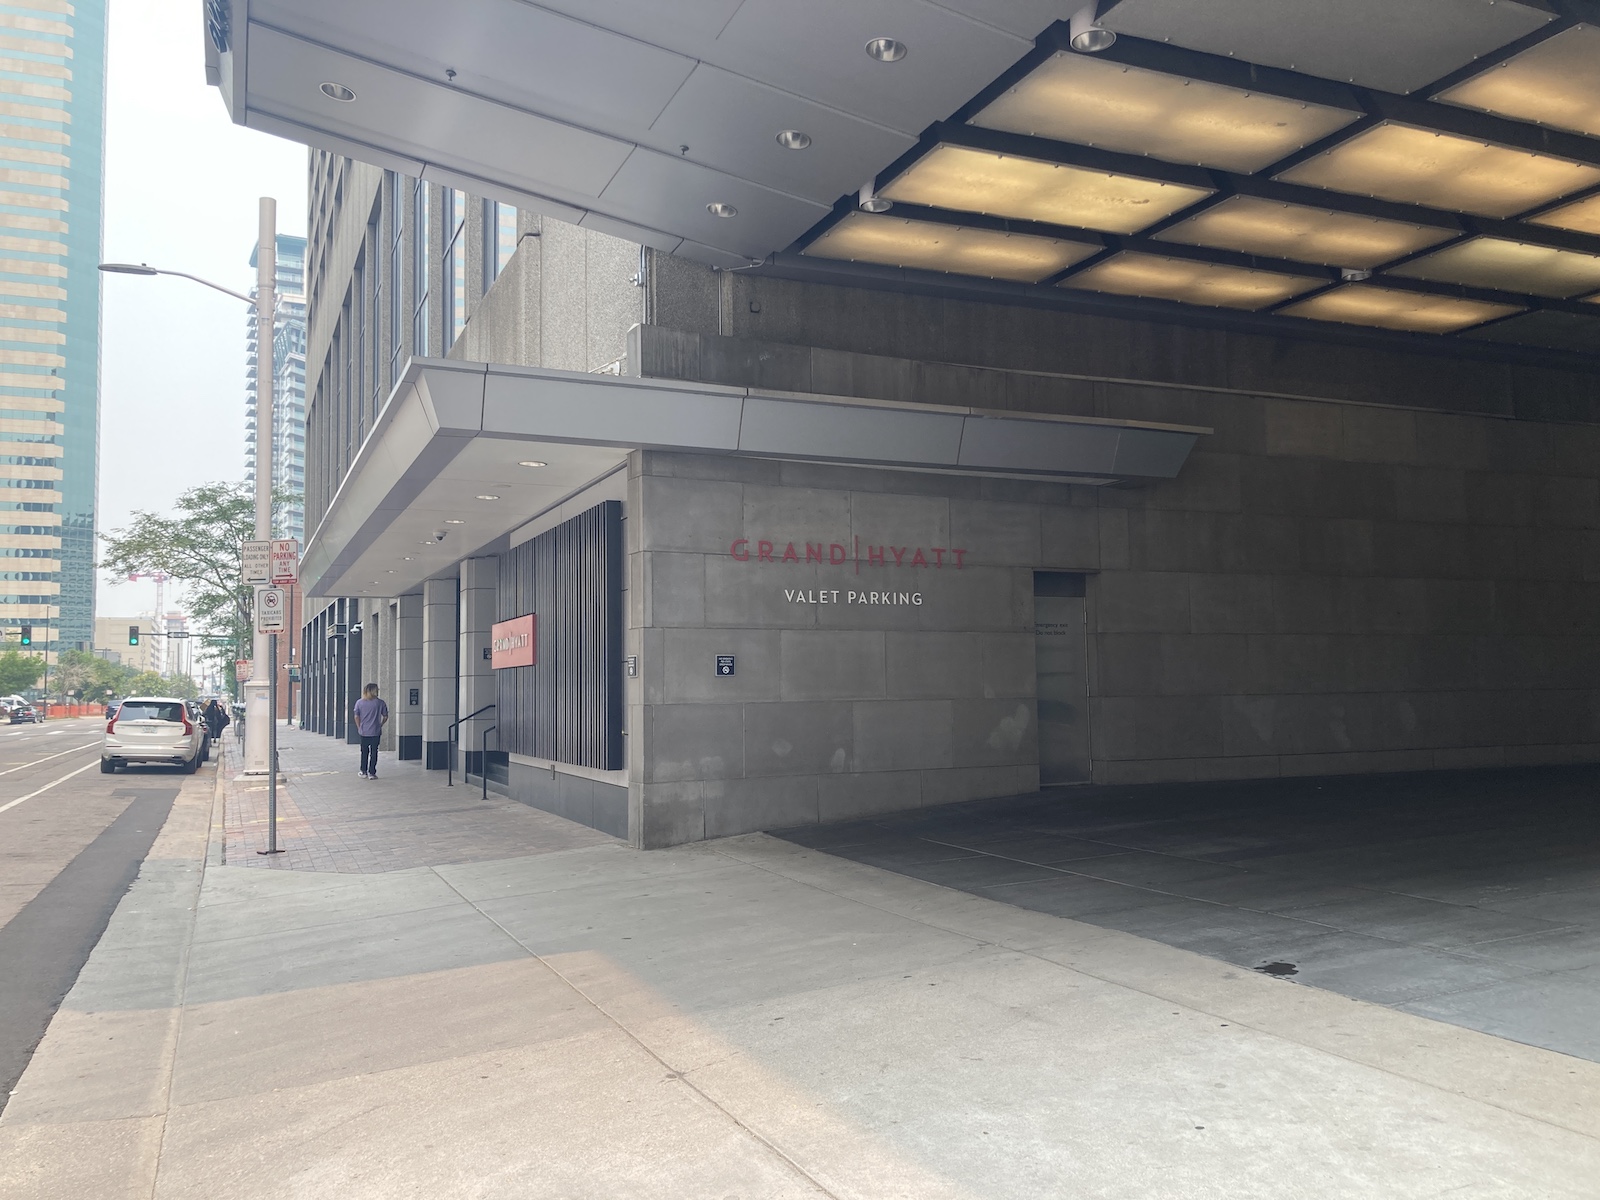 Grand Hyatt Denver Review – Downtown Hotel With Many Positives